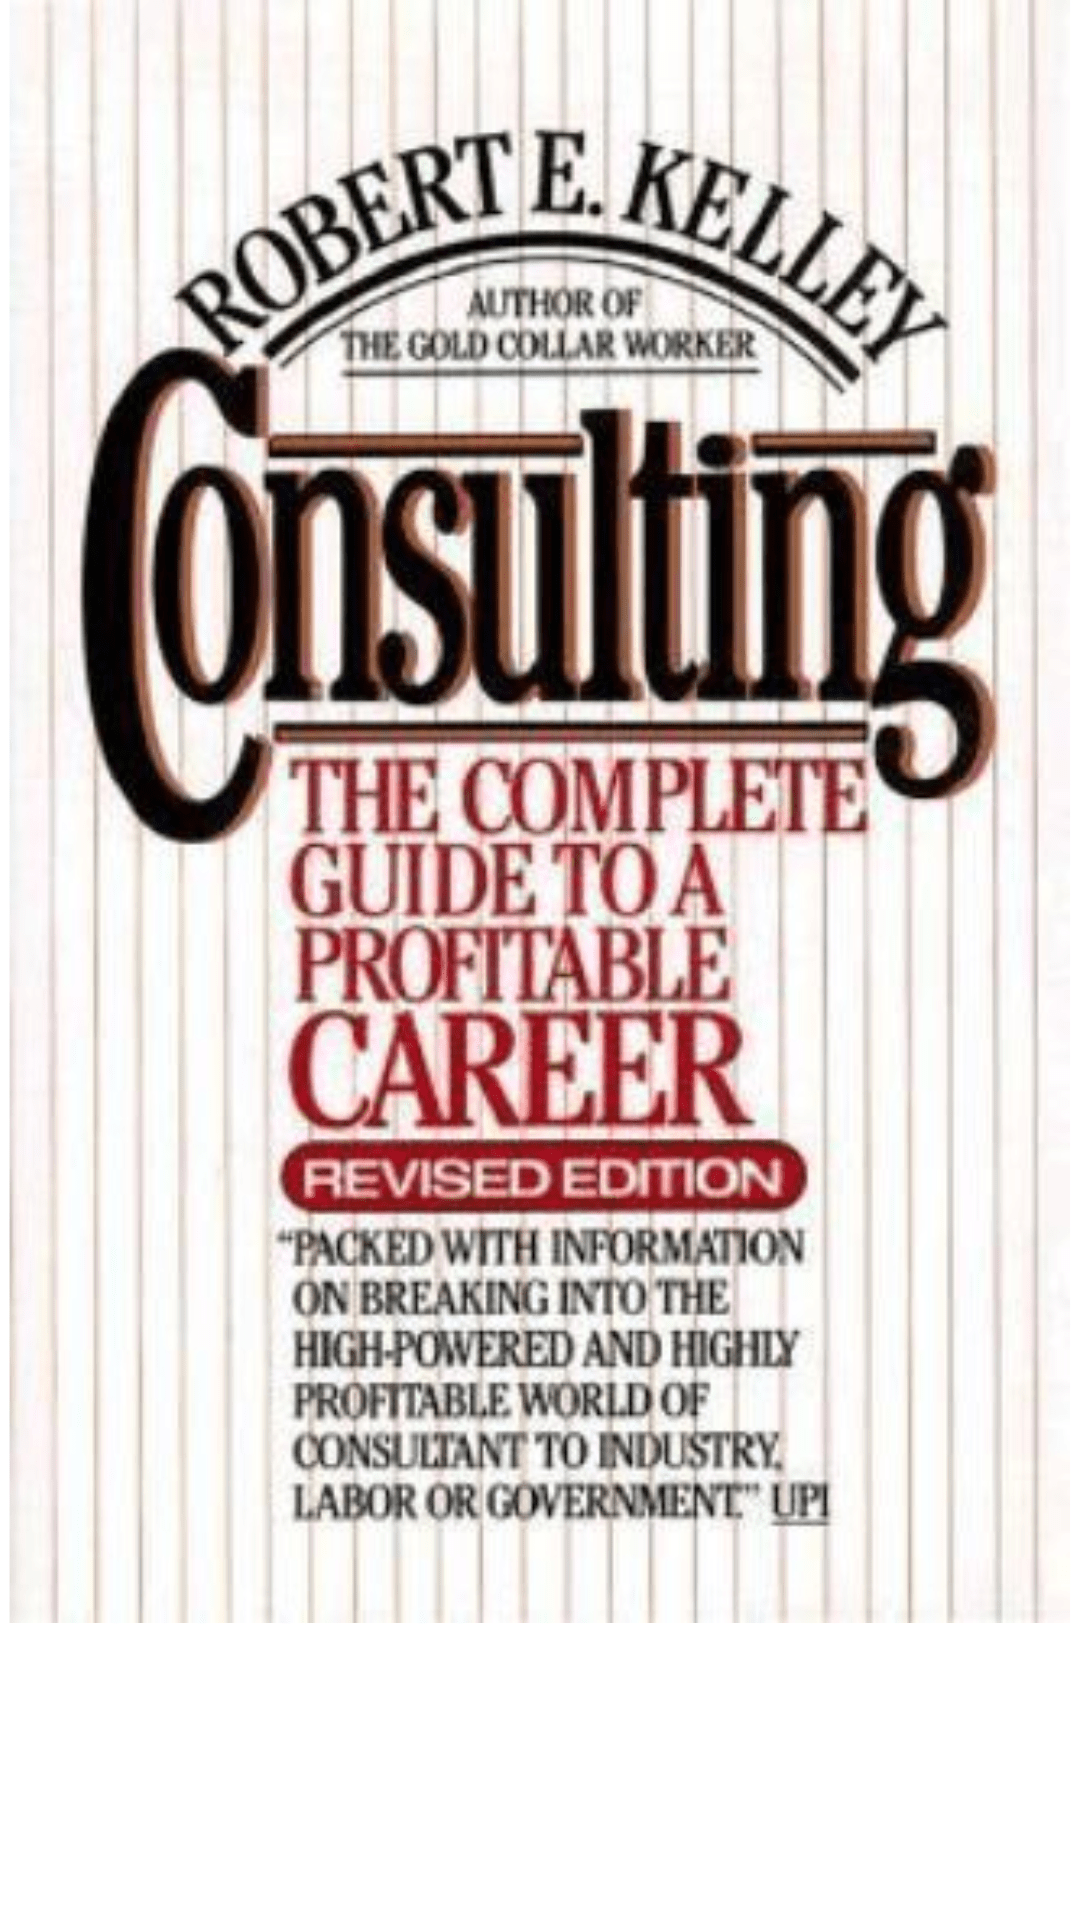 Consulting : The Complete Guide to a Profitable Career